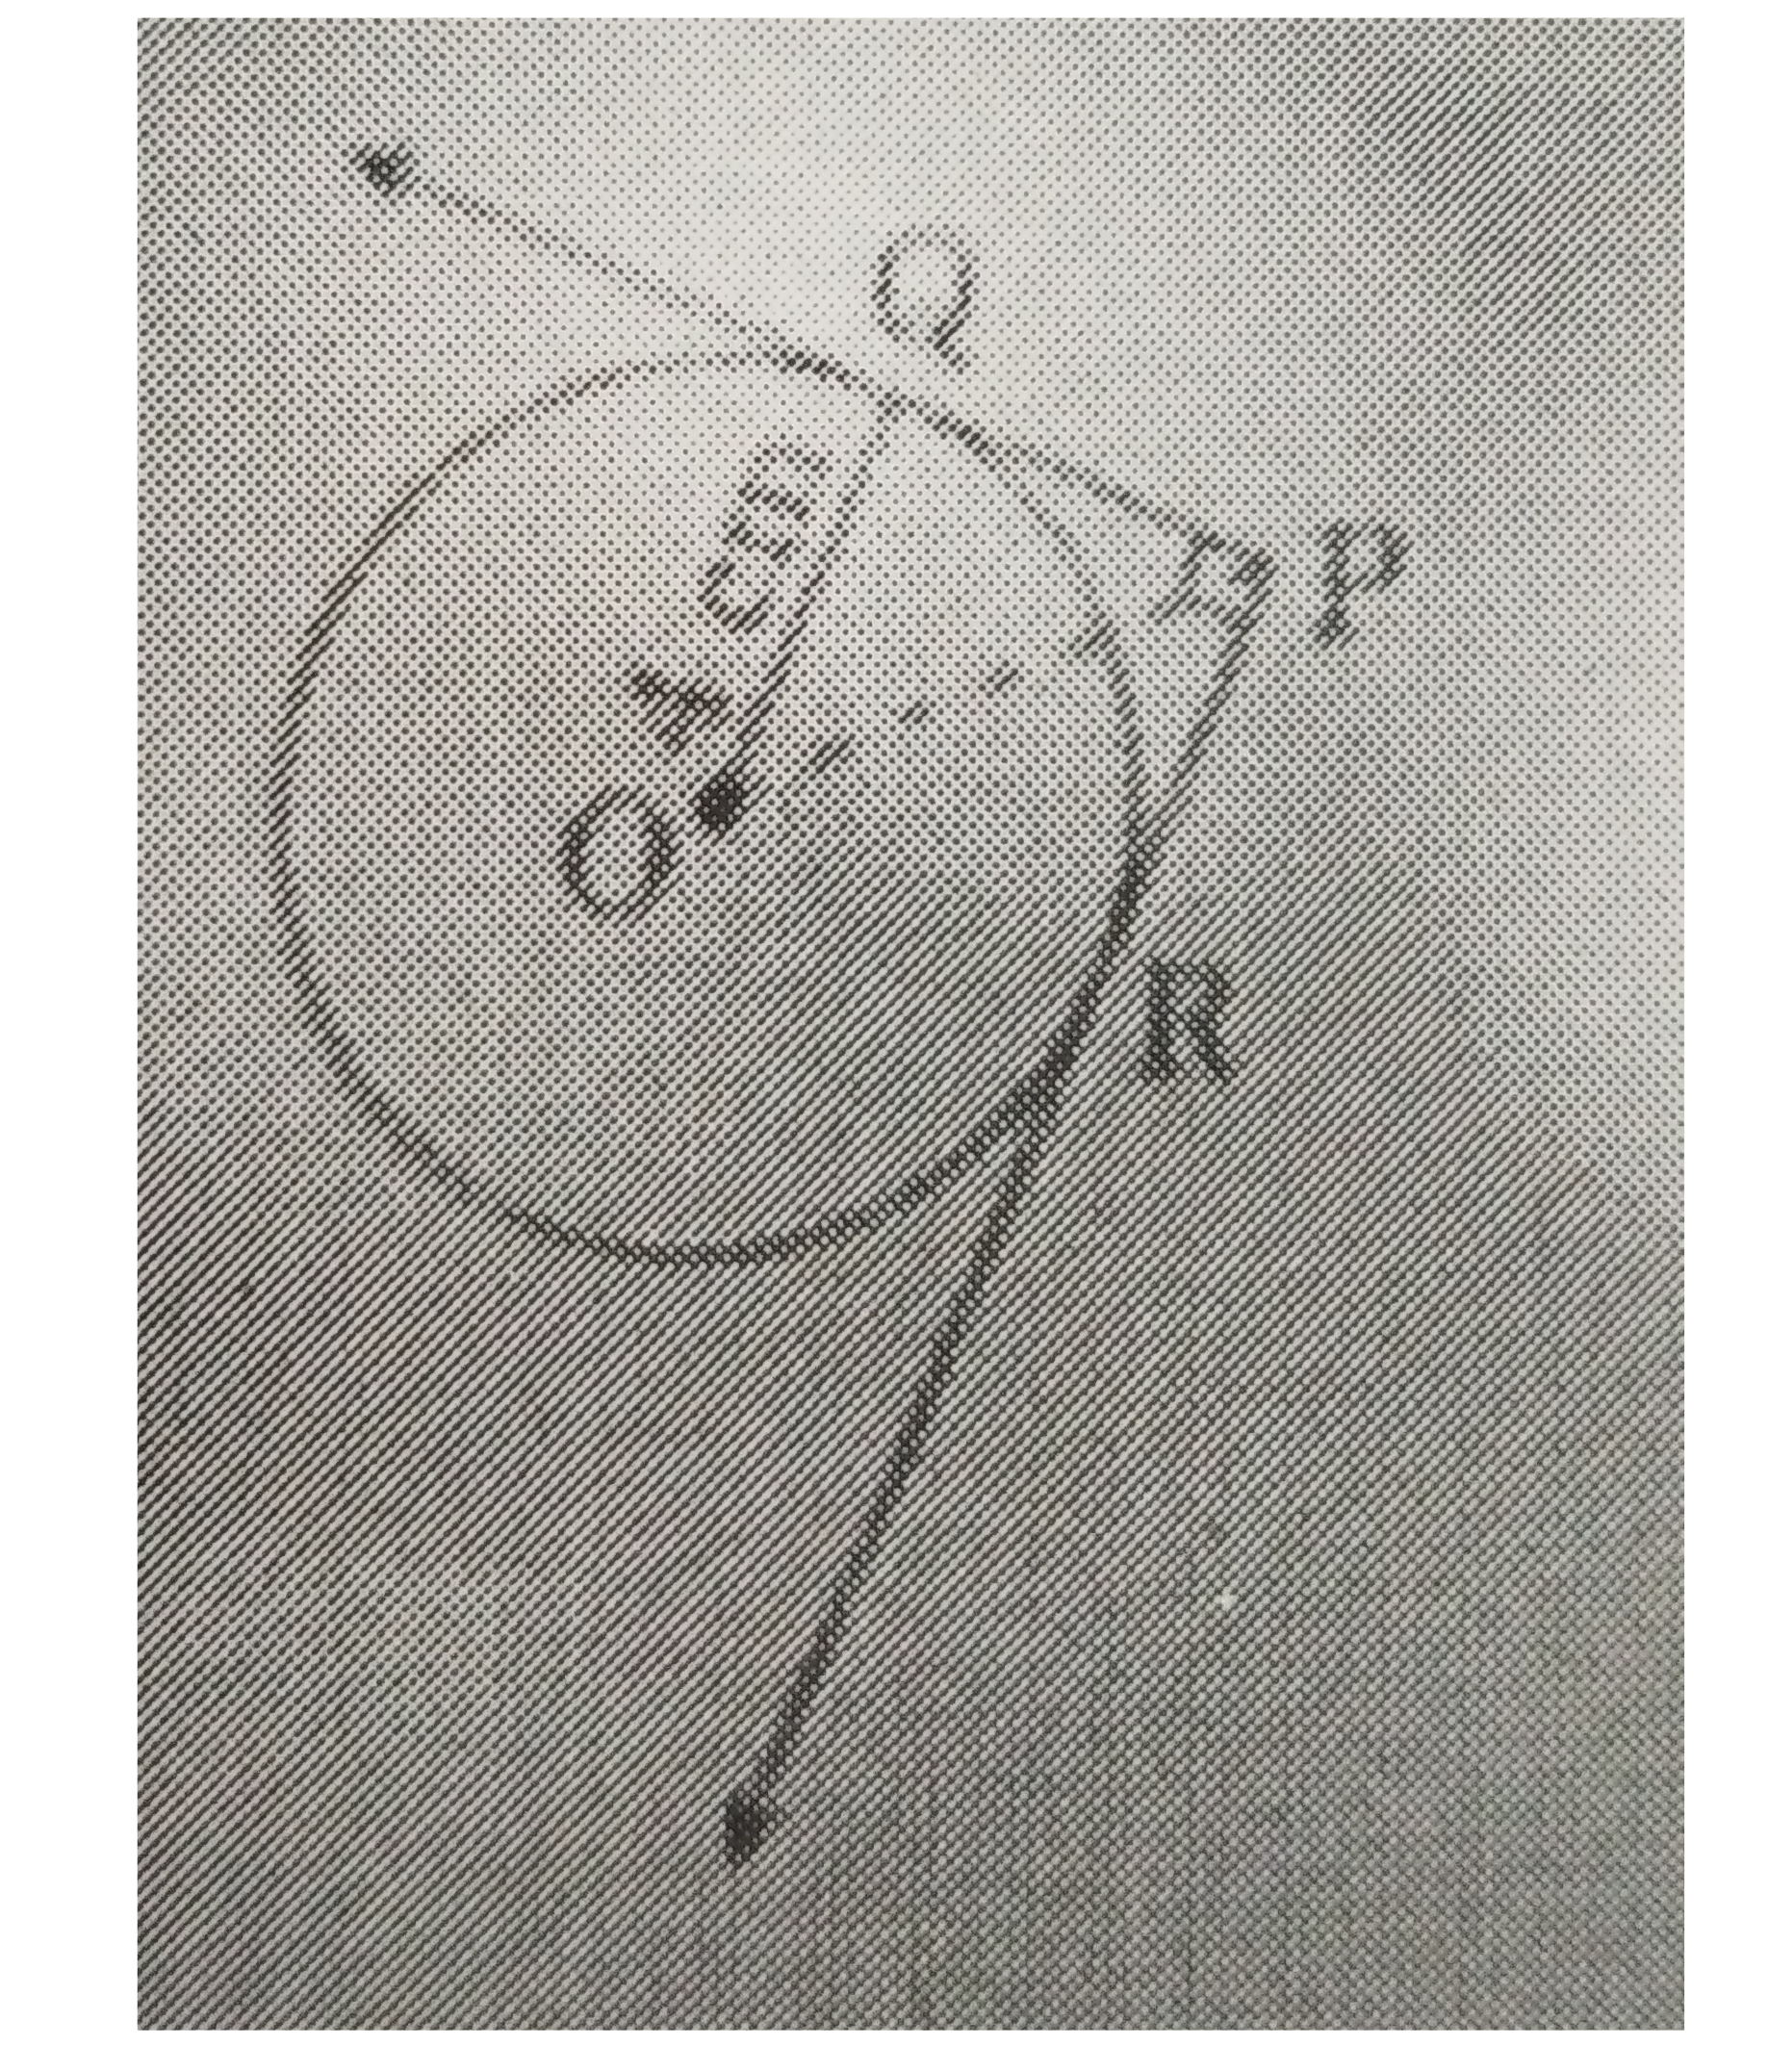 If Figure-1, from an external point P, two tangents PQ and PR are drawn to a circle of radius 4 cm with centre O. if angleQPR=90^(@), then length of PQ is